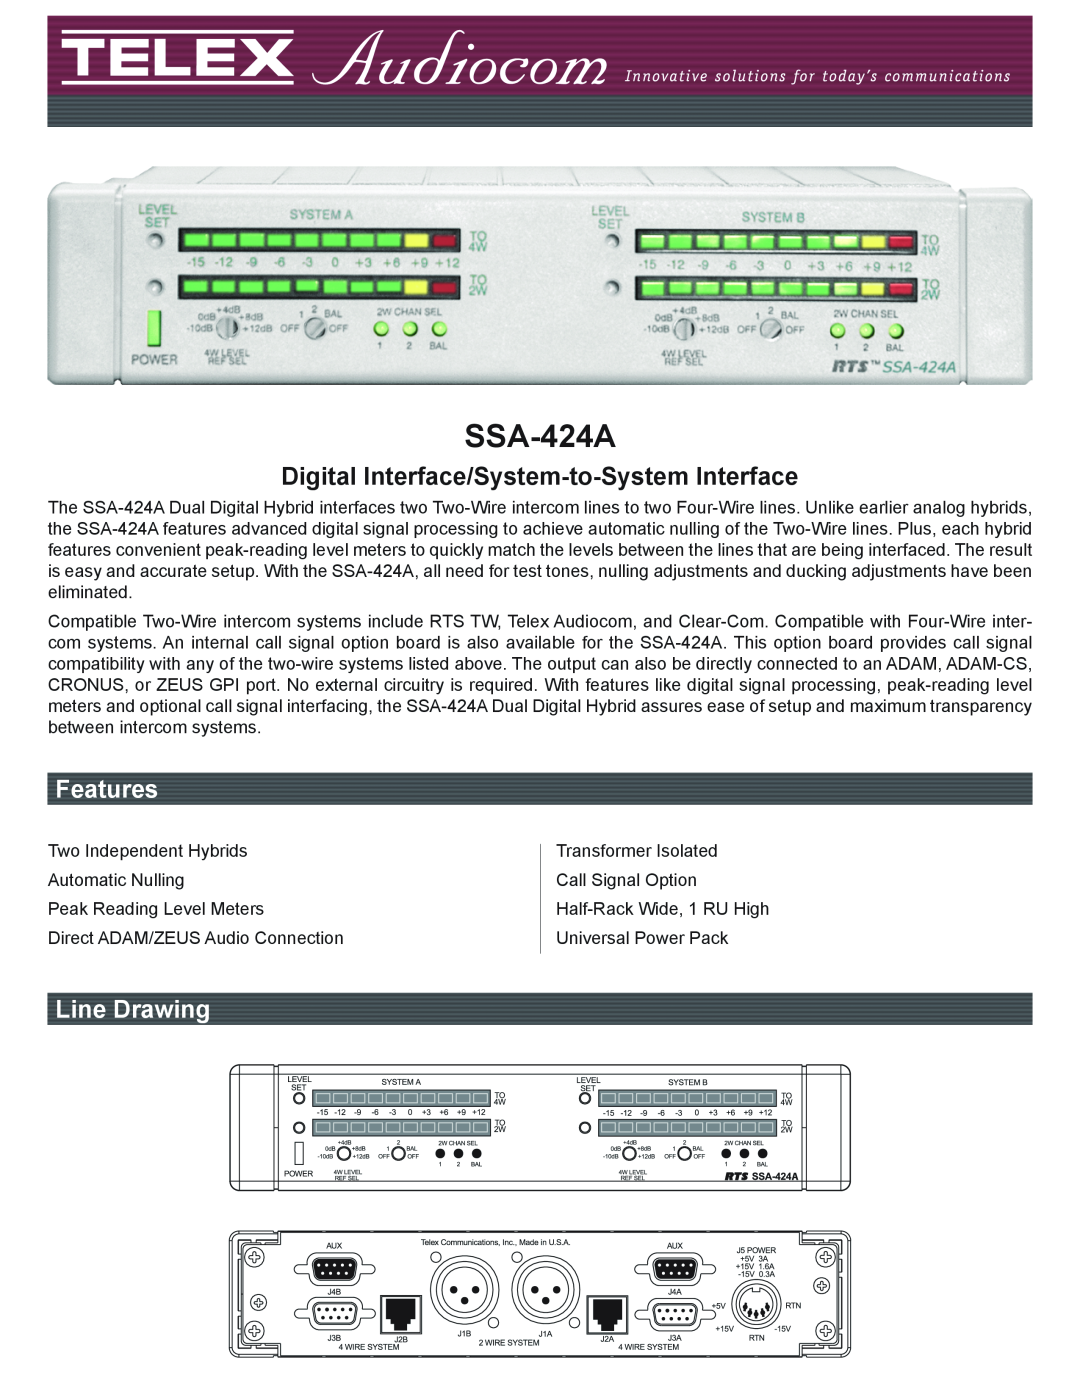 Telex SSA-424A manual Digital Interface/System-to-System Interface, Features, Line Drawing 